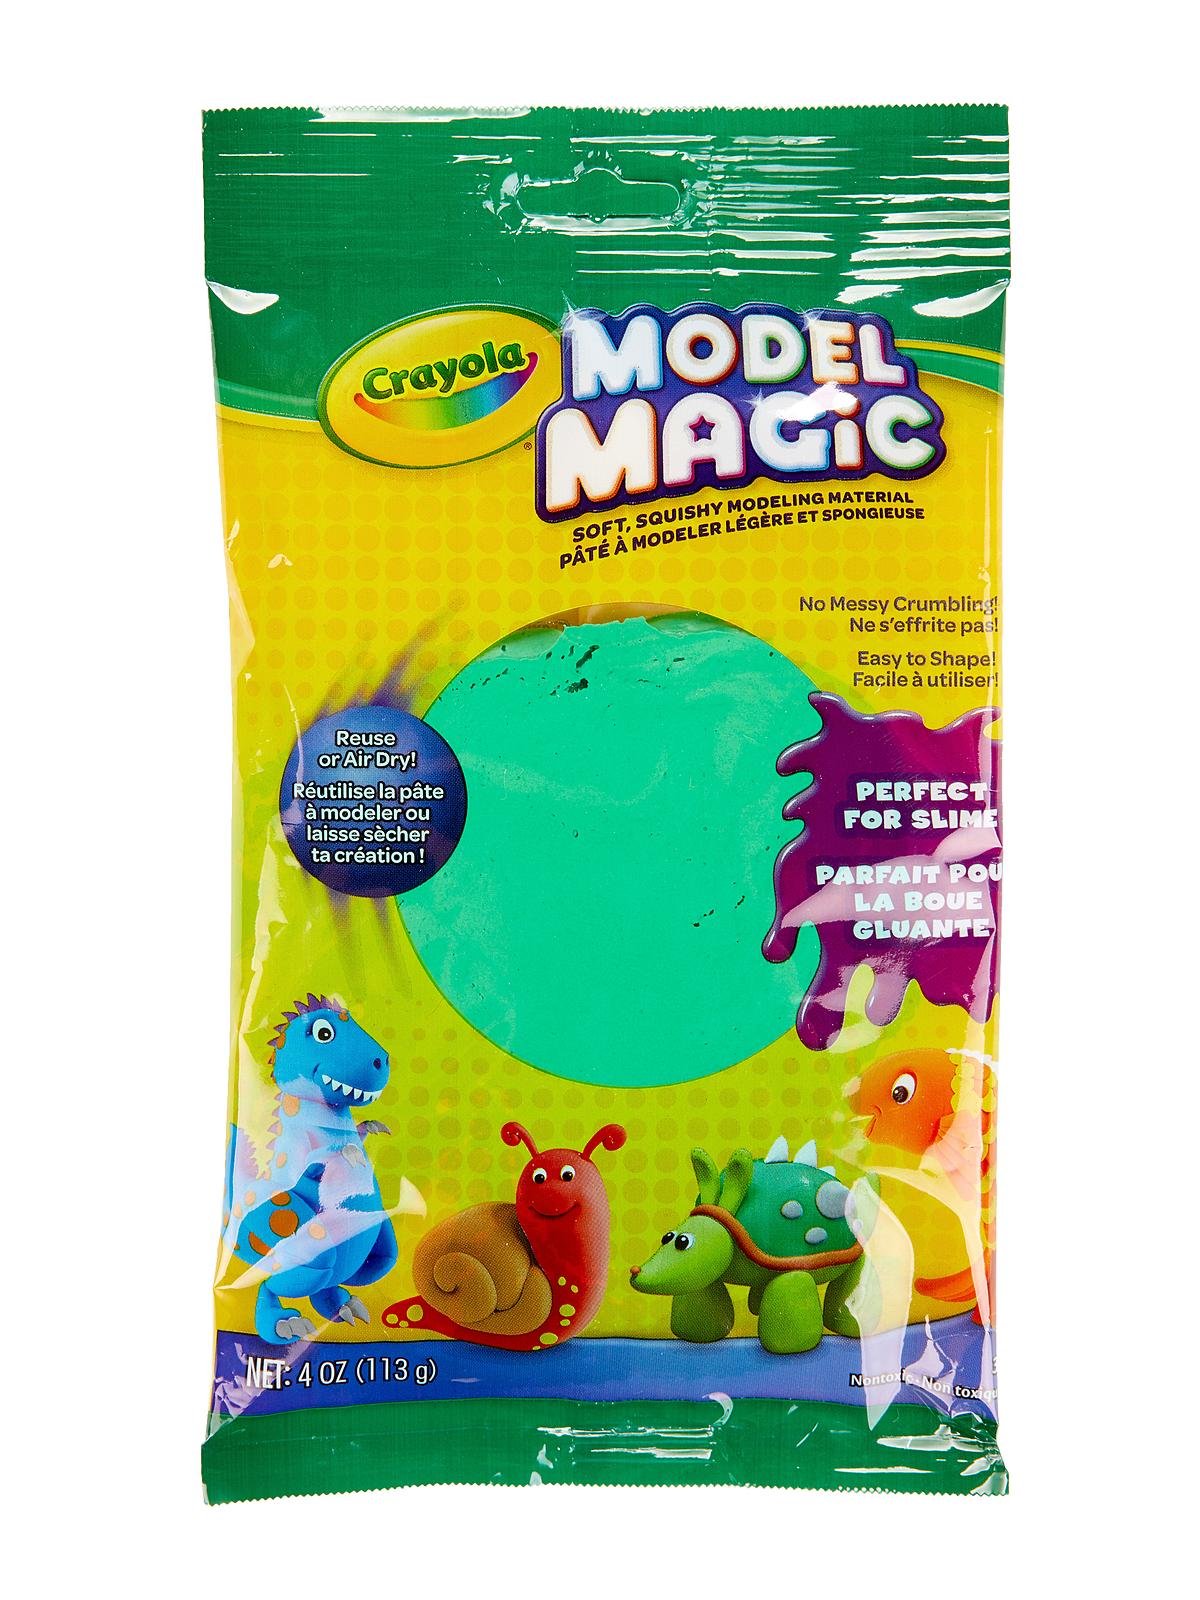 Crayola Model Magic Shimmer Chatoyant, Assorted Color - 2.5 oz